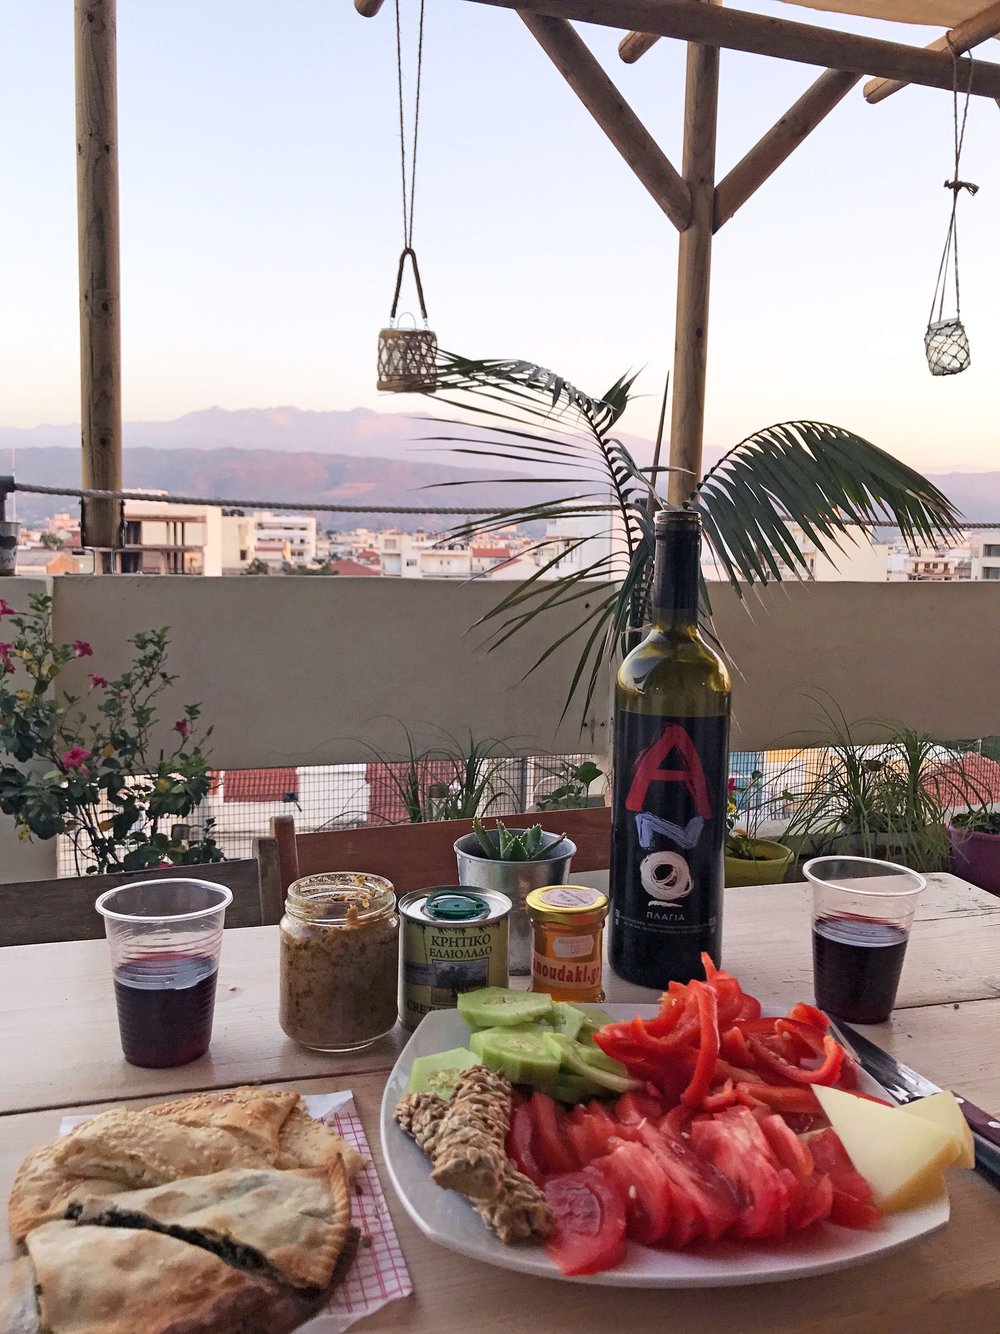 Chania picnic | Top 8 Experiences from Road Tripping Crete, Greece